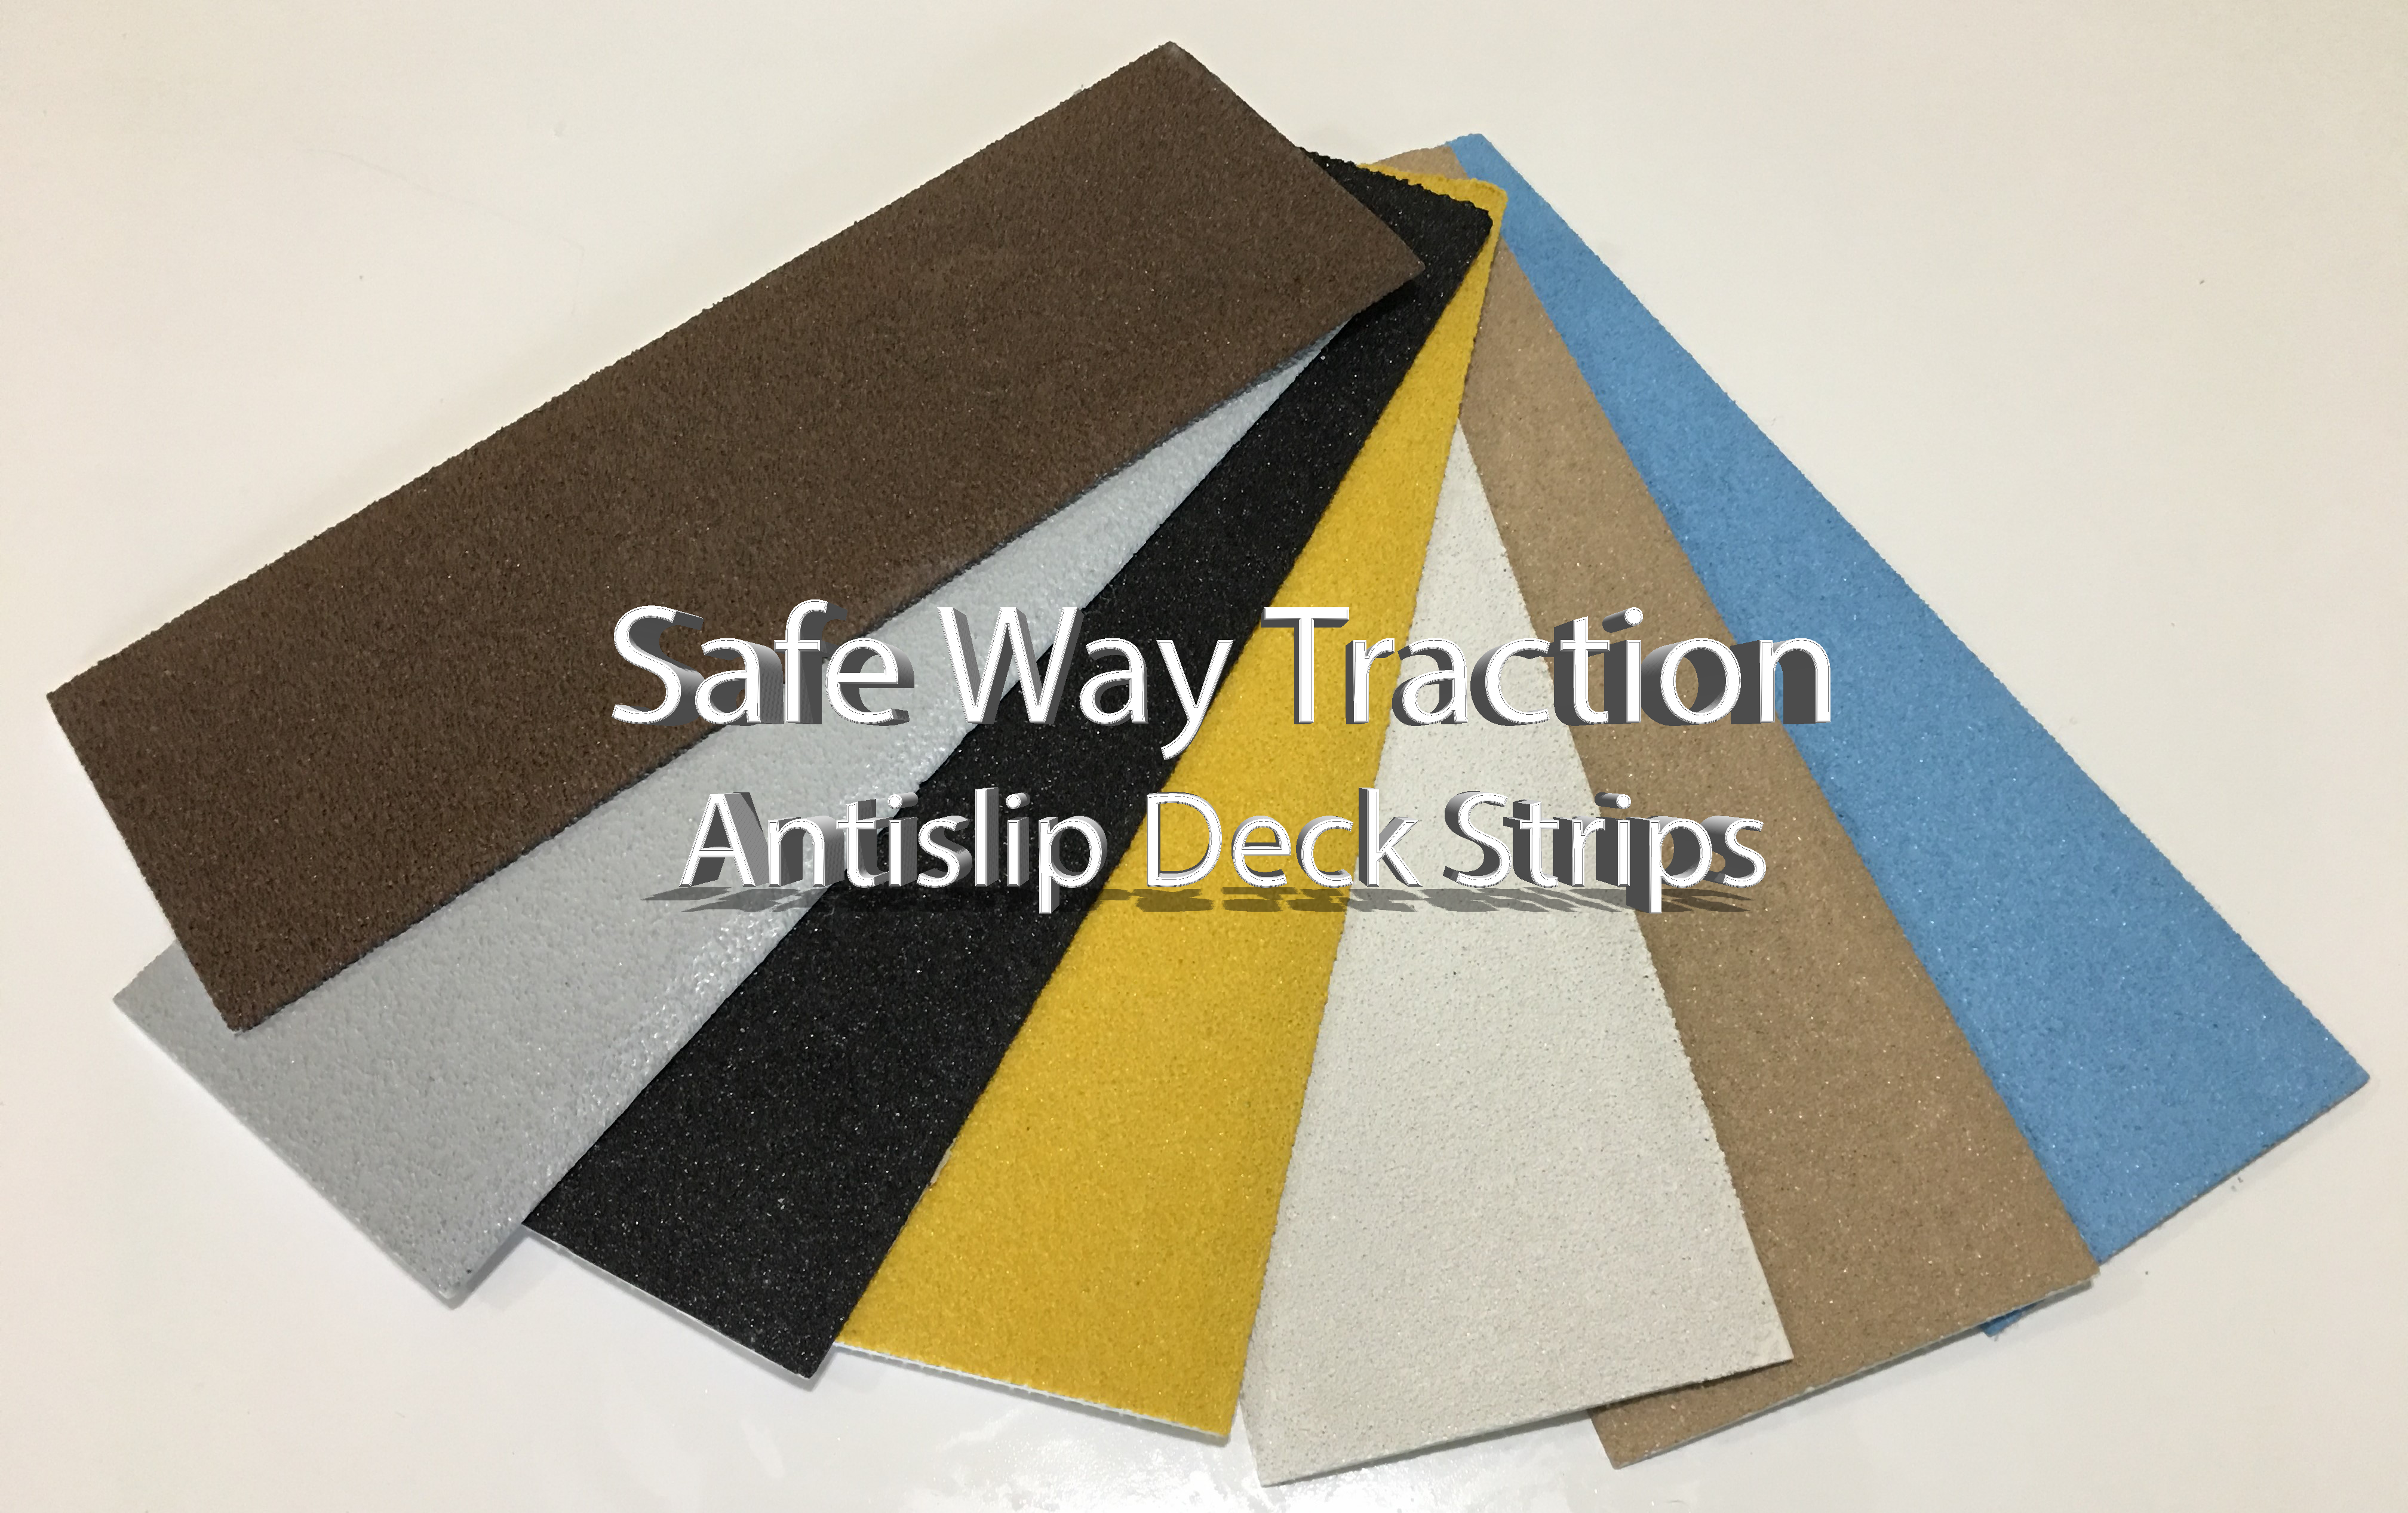 Safe Way Traction 12 X 10 Foot Roll White Adhesive Coarse Vinyl Anti Slip Non Skid Safety Tape Boats Jet Skis Surf Boards 4220-12-10 